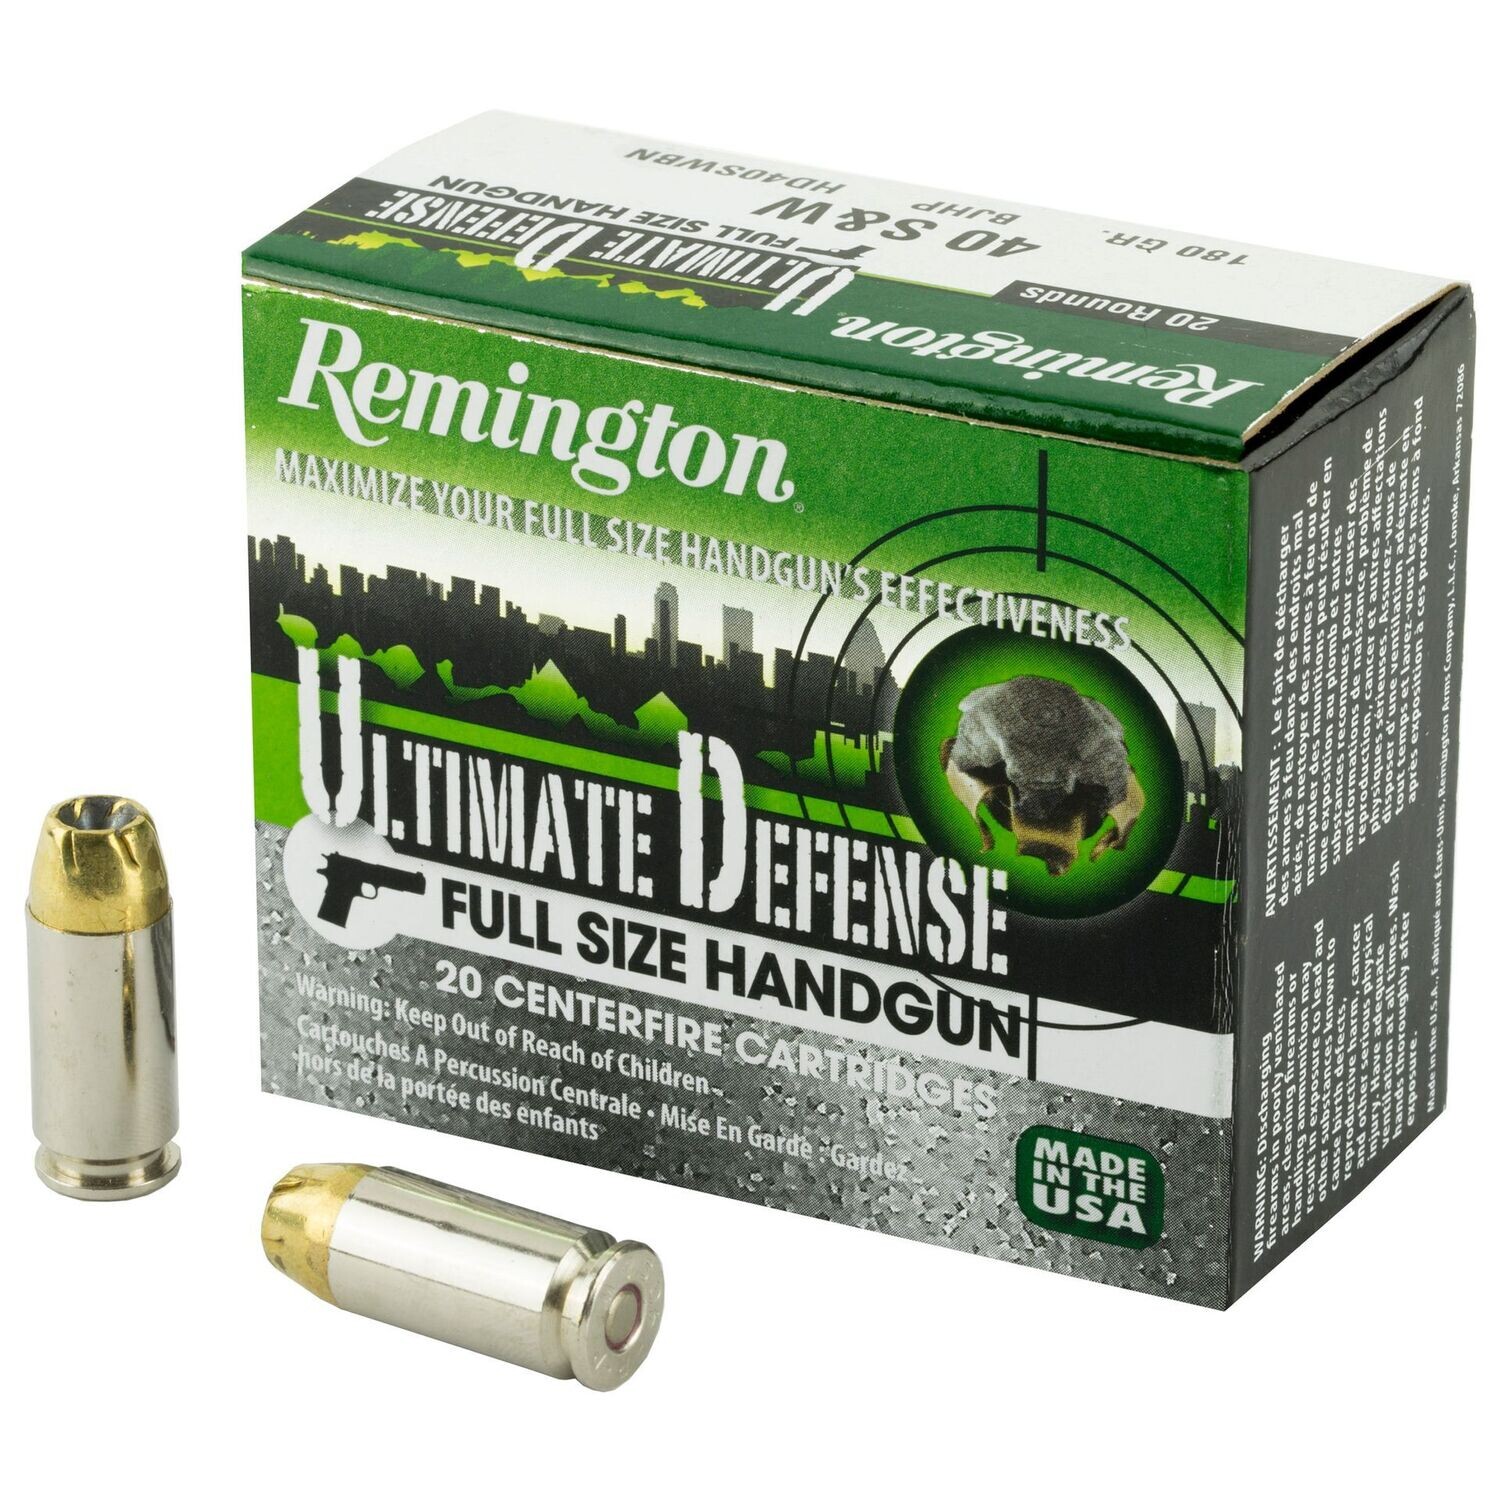 Remington, Ultimate Defense, 40S&W, 180 Grain, Brass Jacketed Hollow Point, 20 Round Box